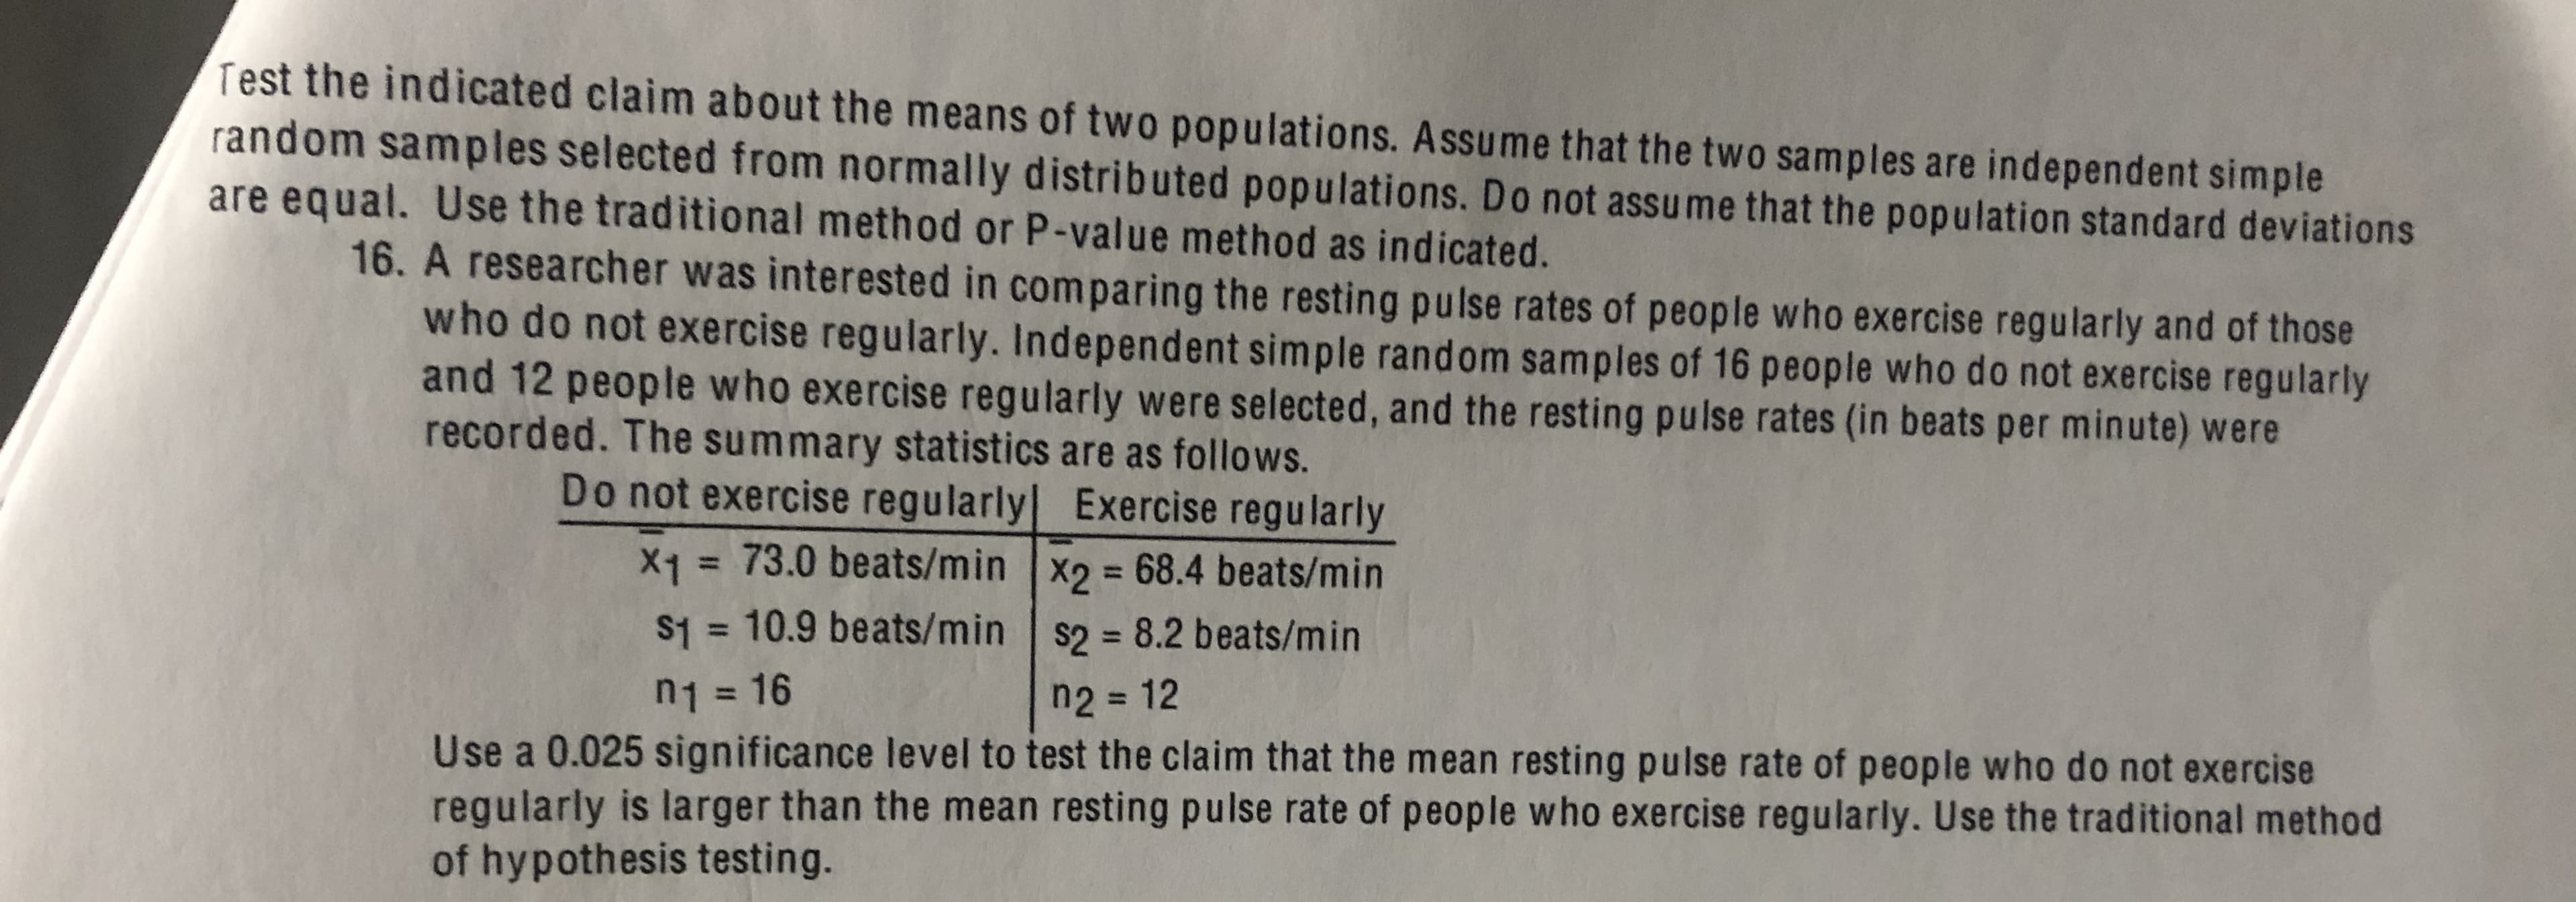 Test the indicated claim about the means of two populations. Assume that the two samples are independent simple
random samples selected from normally distributed populations. Do not assume that the population standard deviations
are equal. Use the traditional method or P-value method as indicated.
16. A researcher was interested in comparing the resting pulse rates of people who exercise regularly and of those
who do not exercise regularly. Independent simple random samples of 16 people who do not exercise regularly
and 12 people who exercise regularly were selected, and the resting pulse rates (in beats per minute) were
recorded. The summary statistics are as follows.
Do not exercise regularly Exercise regularly
X1 = 73.0 beats/min X2 68.4 beats/min
S1 = 10.9 beats/min s2 = 8.2 beats/min
%3D
%3D
%3D
n2 = 12
n1 = 16
%3D
Use a 0.025 significance level to test the claim that the mean resting pulse rate of people who do not exercise
regularly is larger than the mean resting pulse rate of people who exercise regularly. Use the traditional method
of hypothesis testing.
